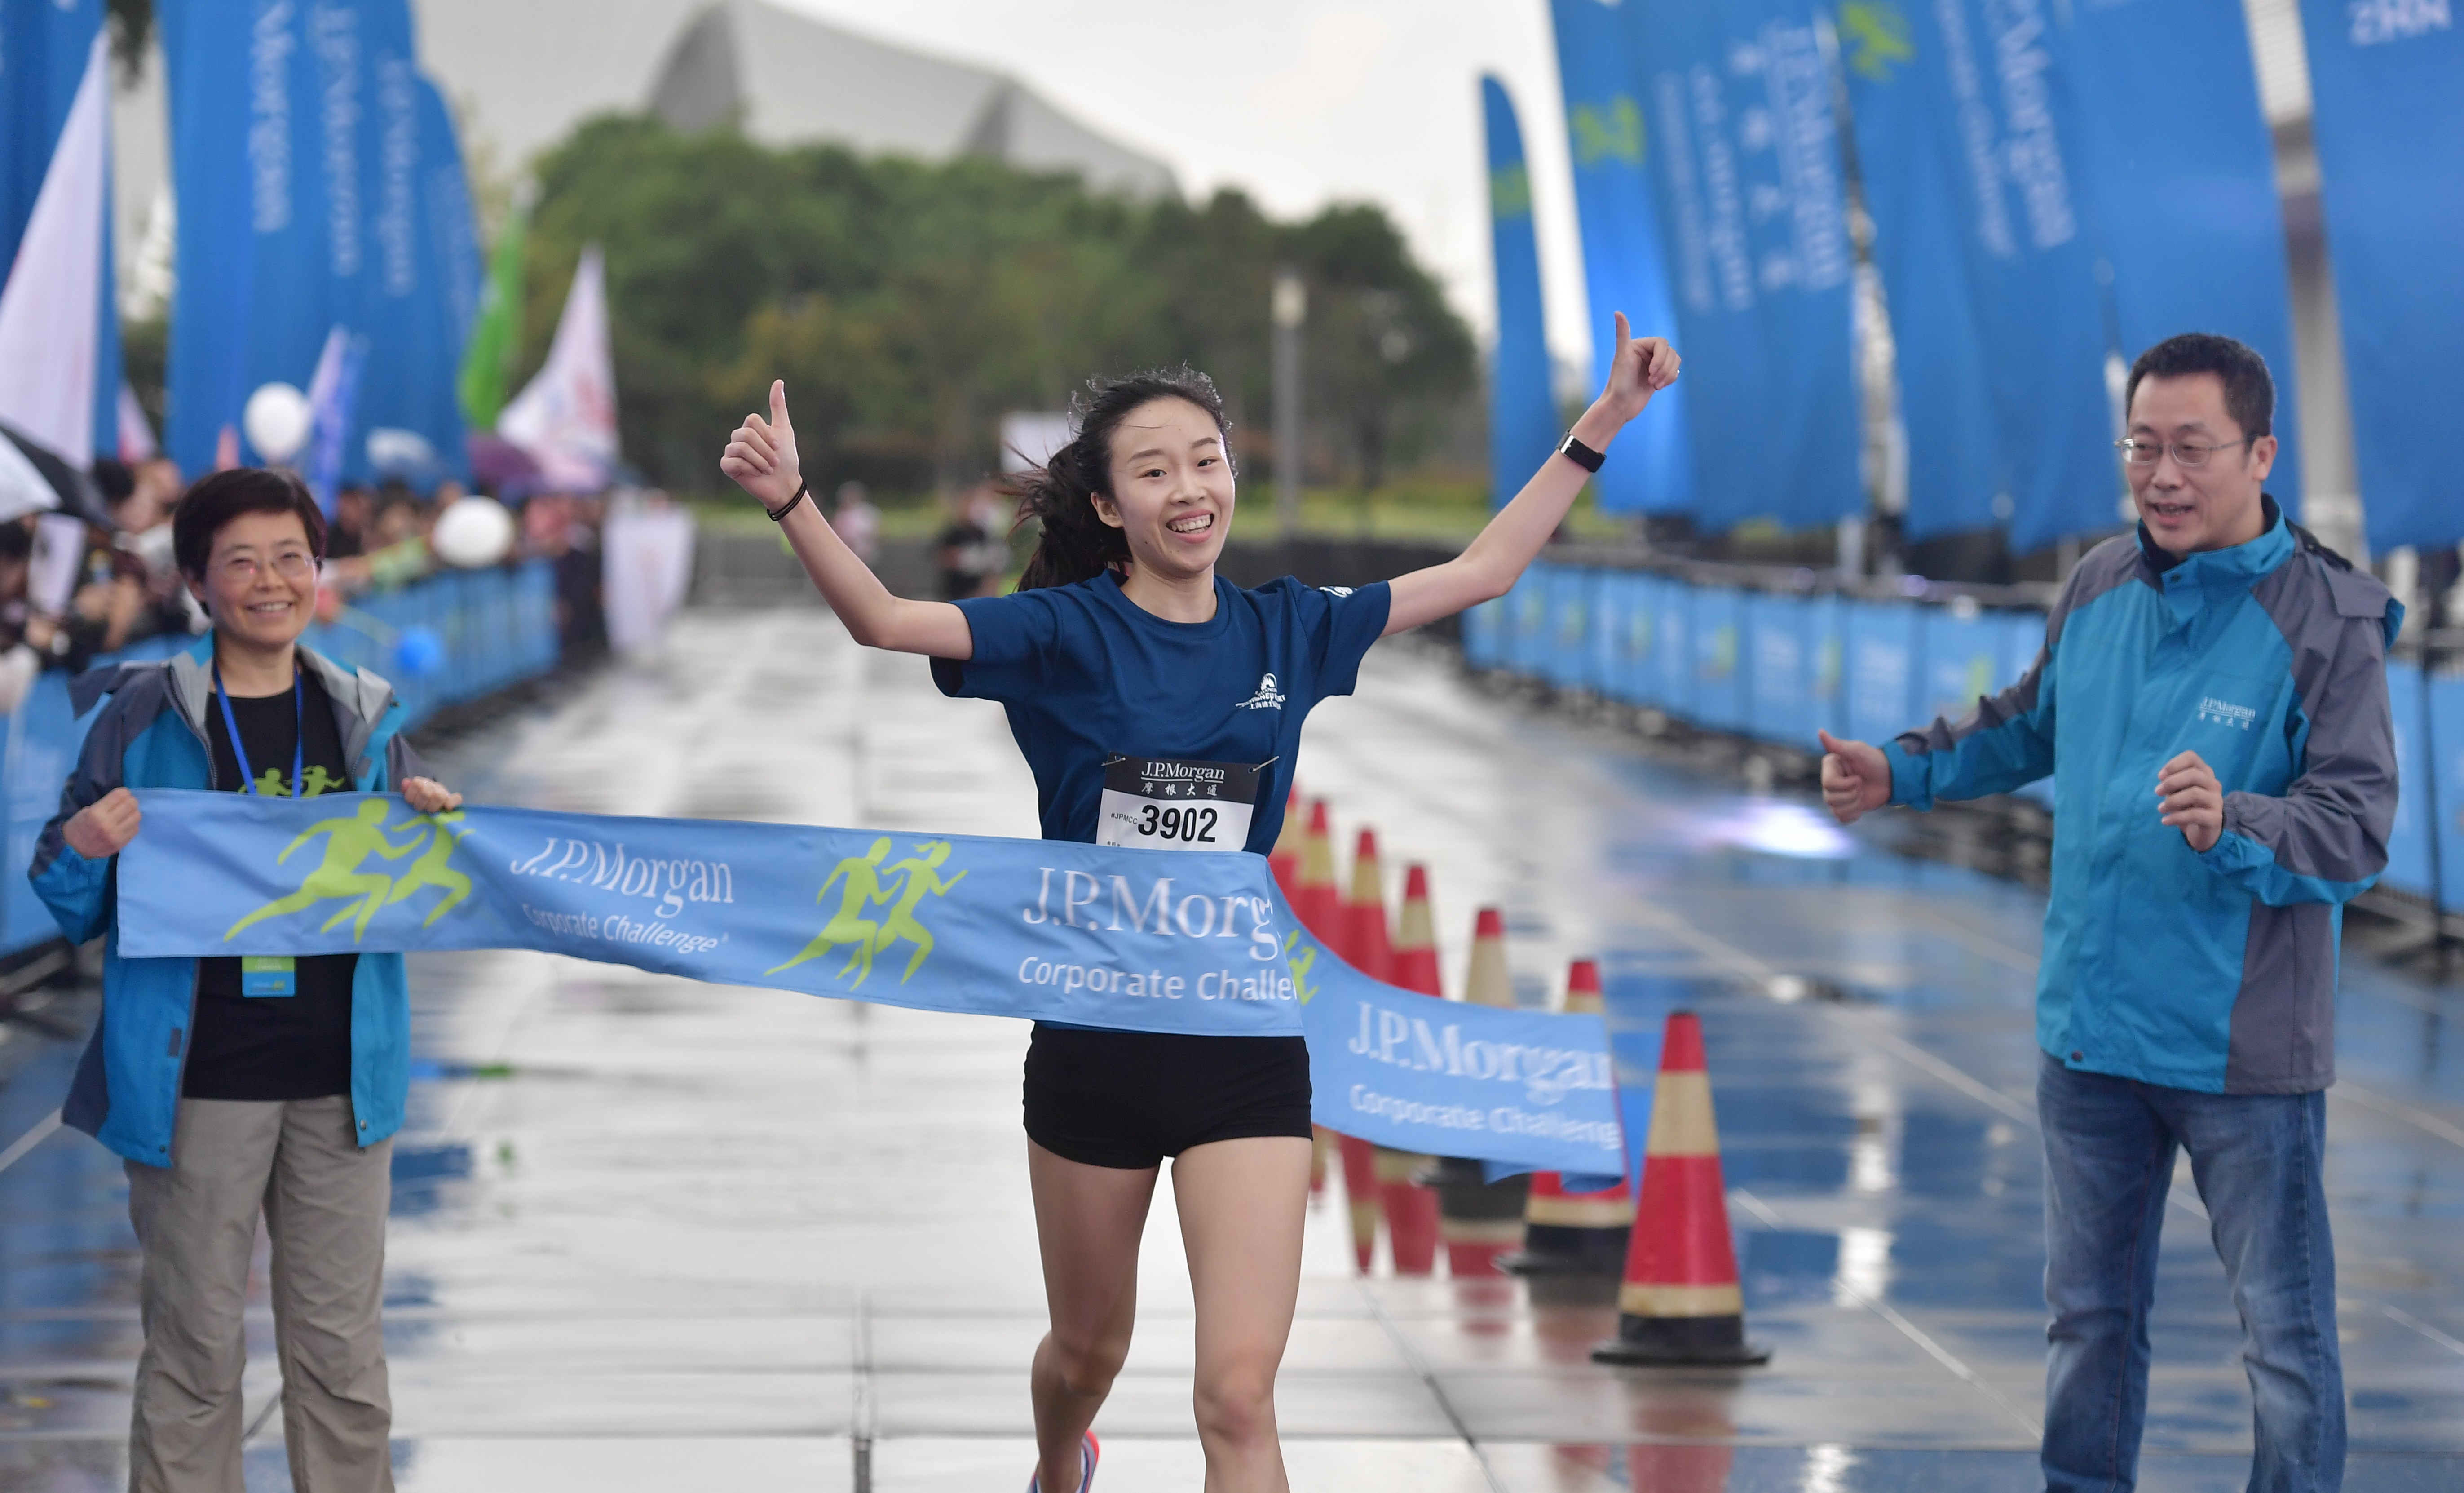 Jiang Yingli crosses the finish line first at the J.P. Morgan Corporate Challenge in Shanghai. 